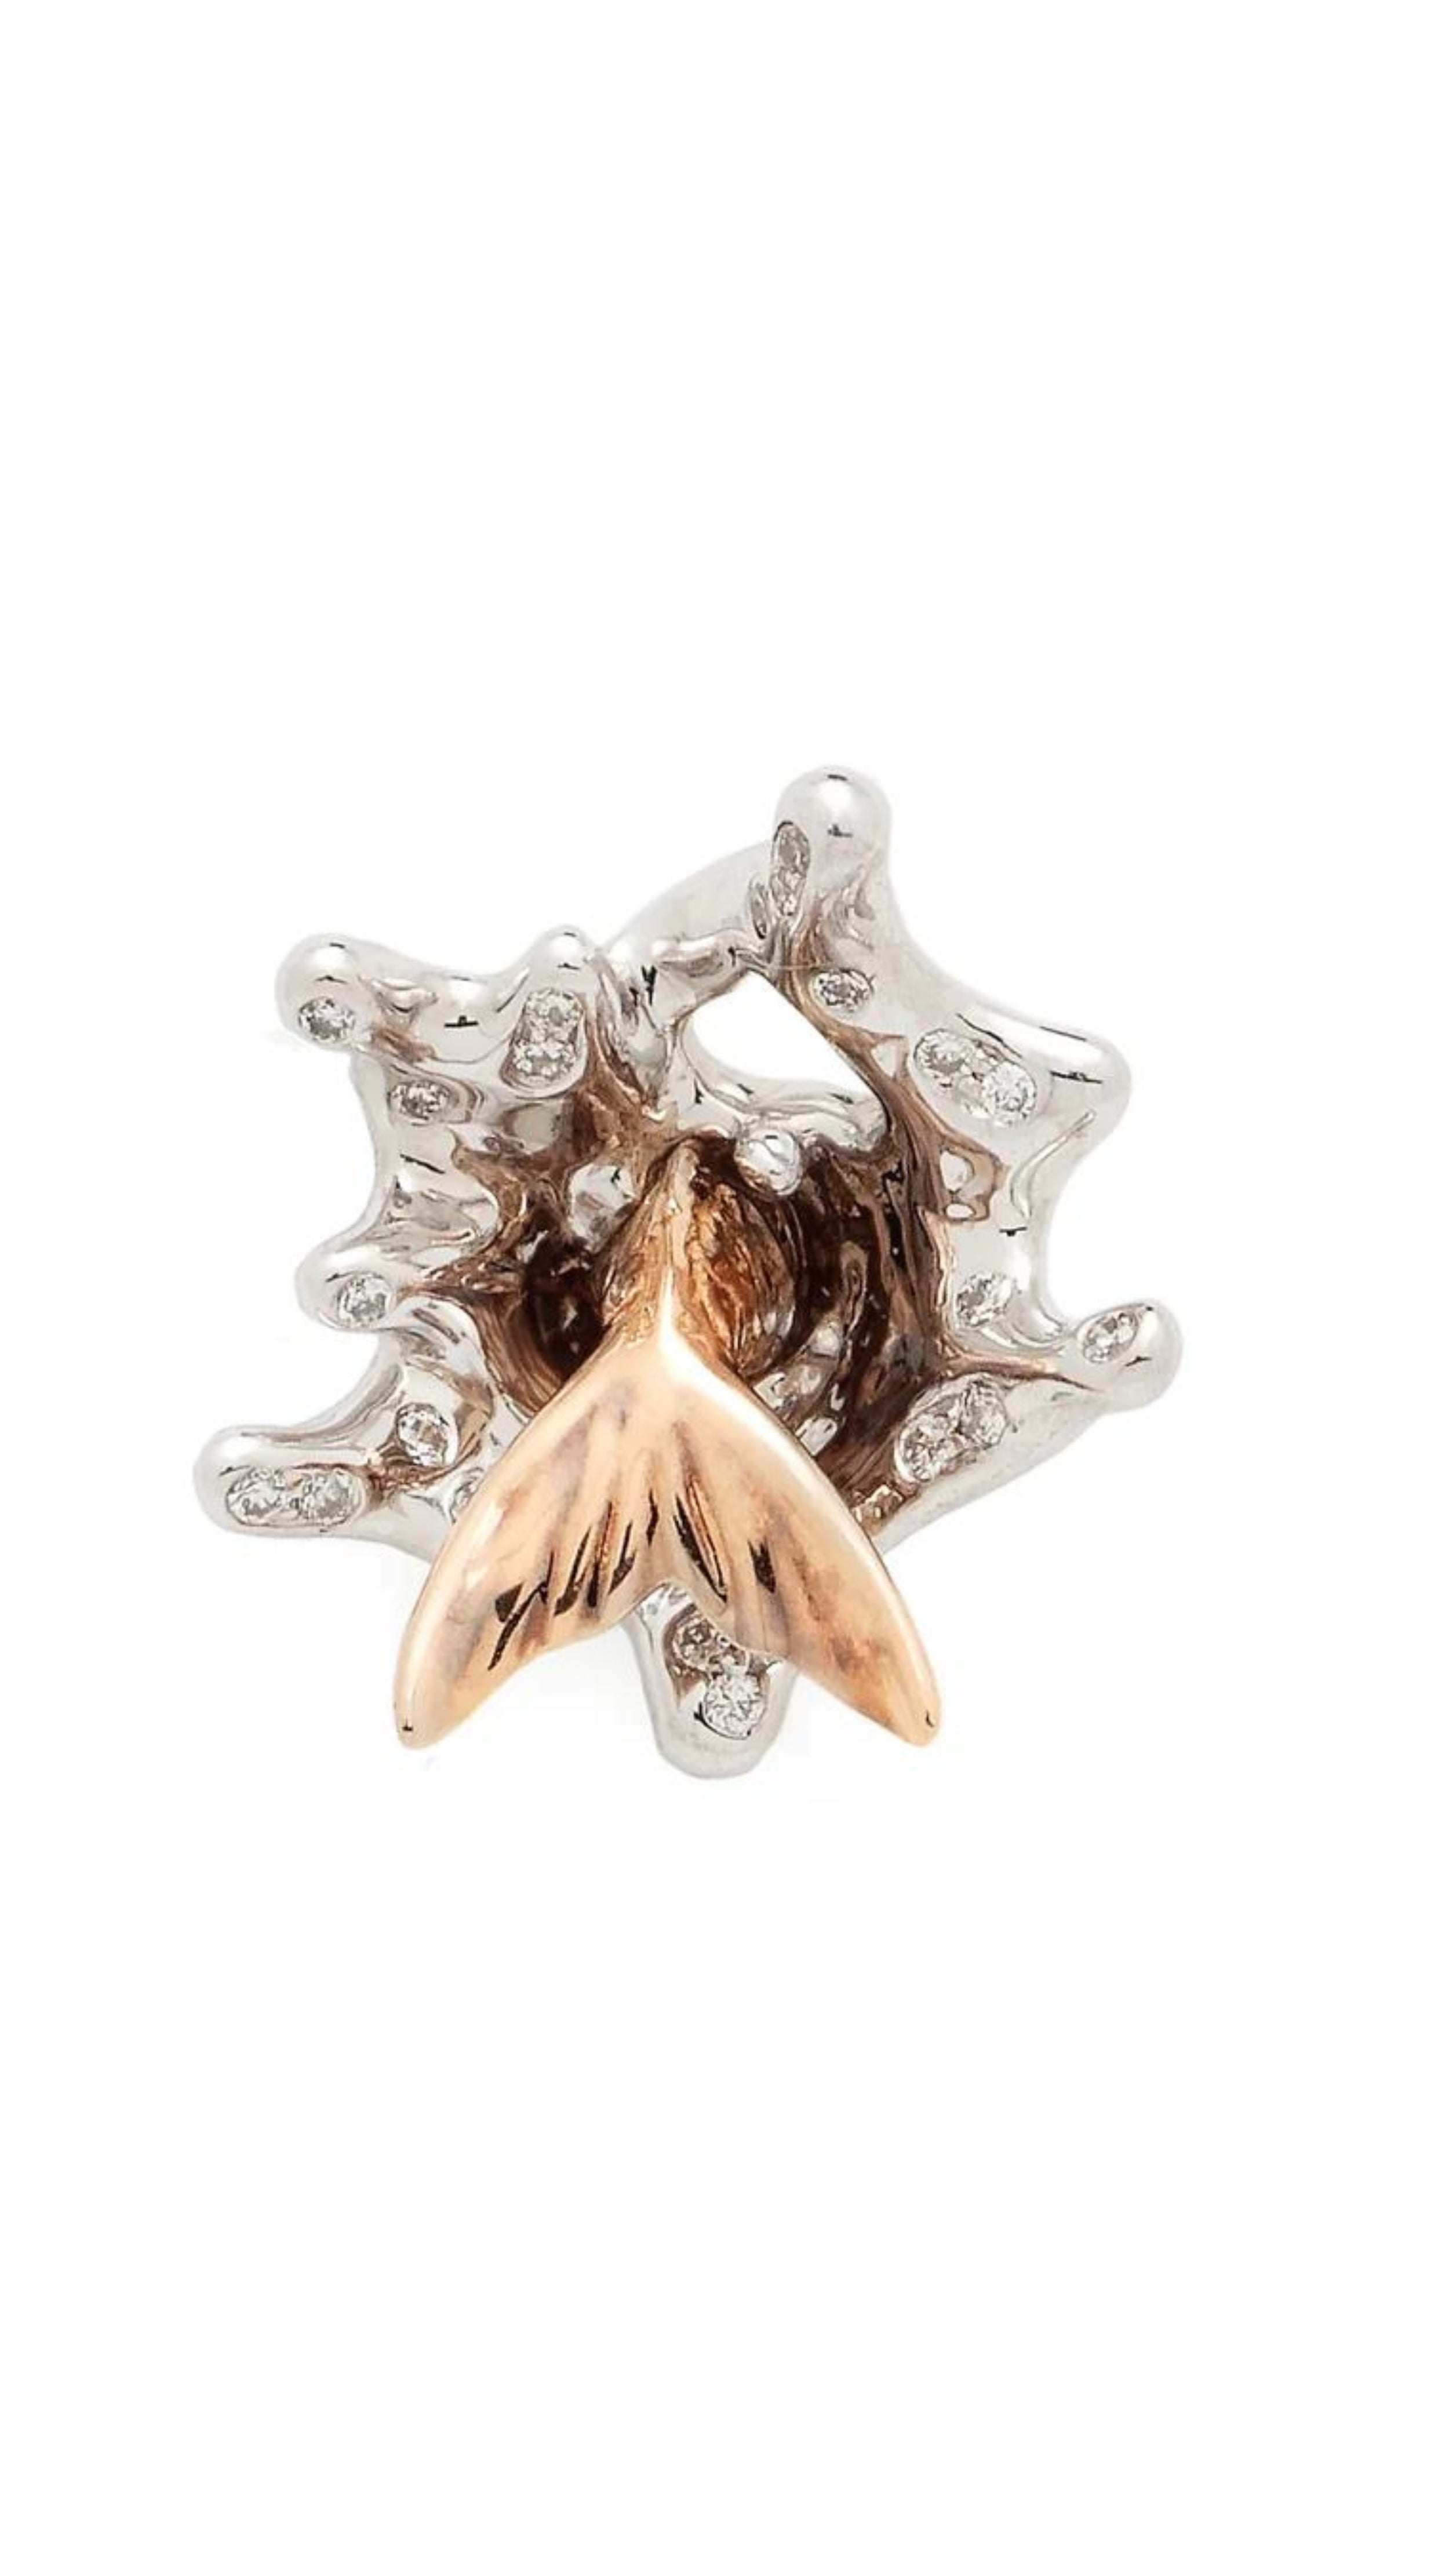 Bibi van der Velden Splash Stud. This sculptural earring is crafted from 18k white and rose gold with tiny diamond accents that evoke the sea's foamy waves. Shown from the front.